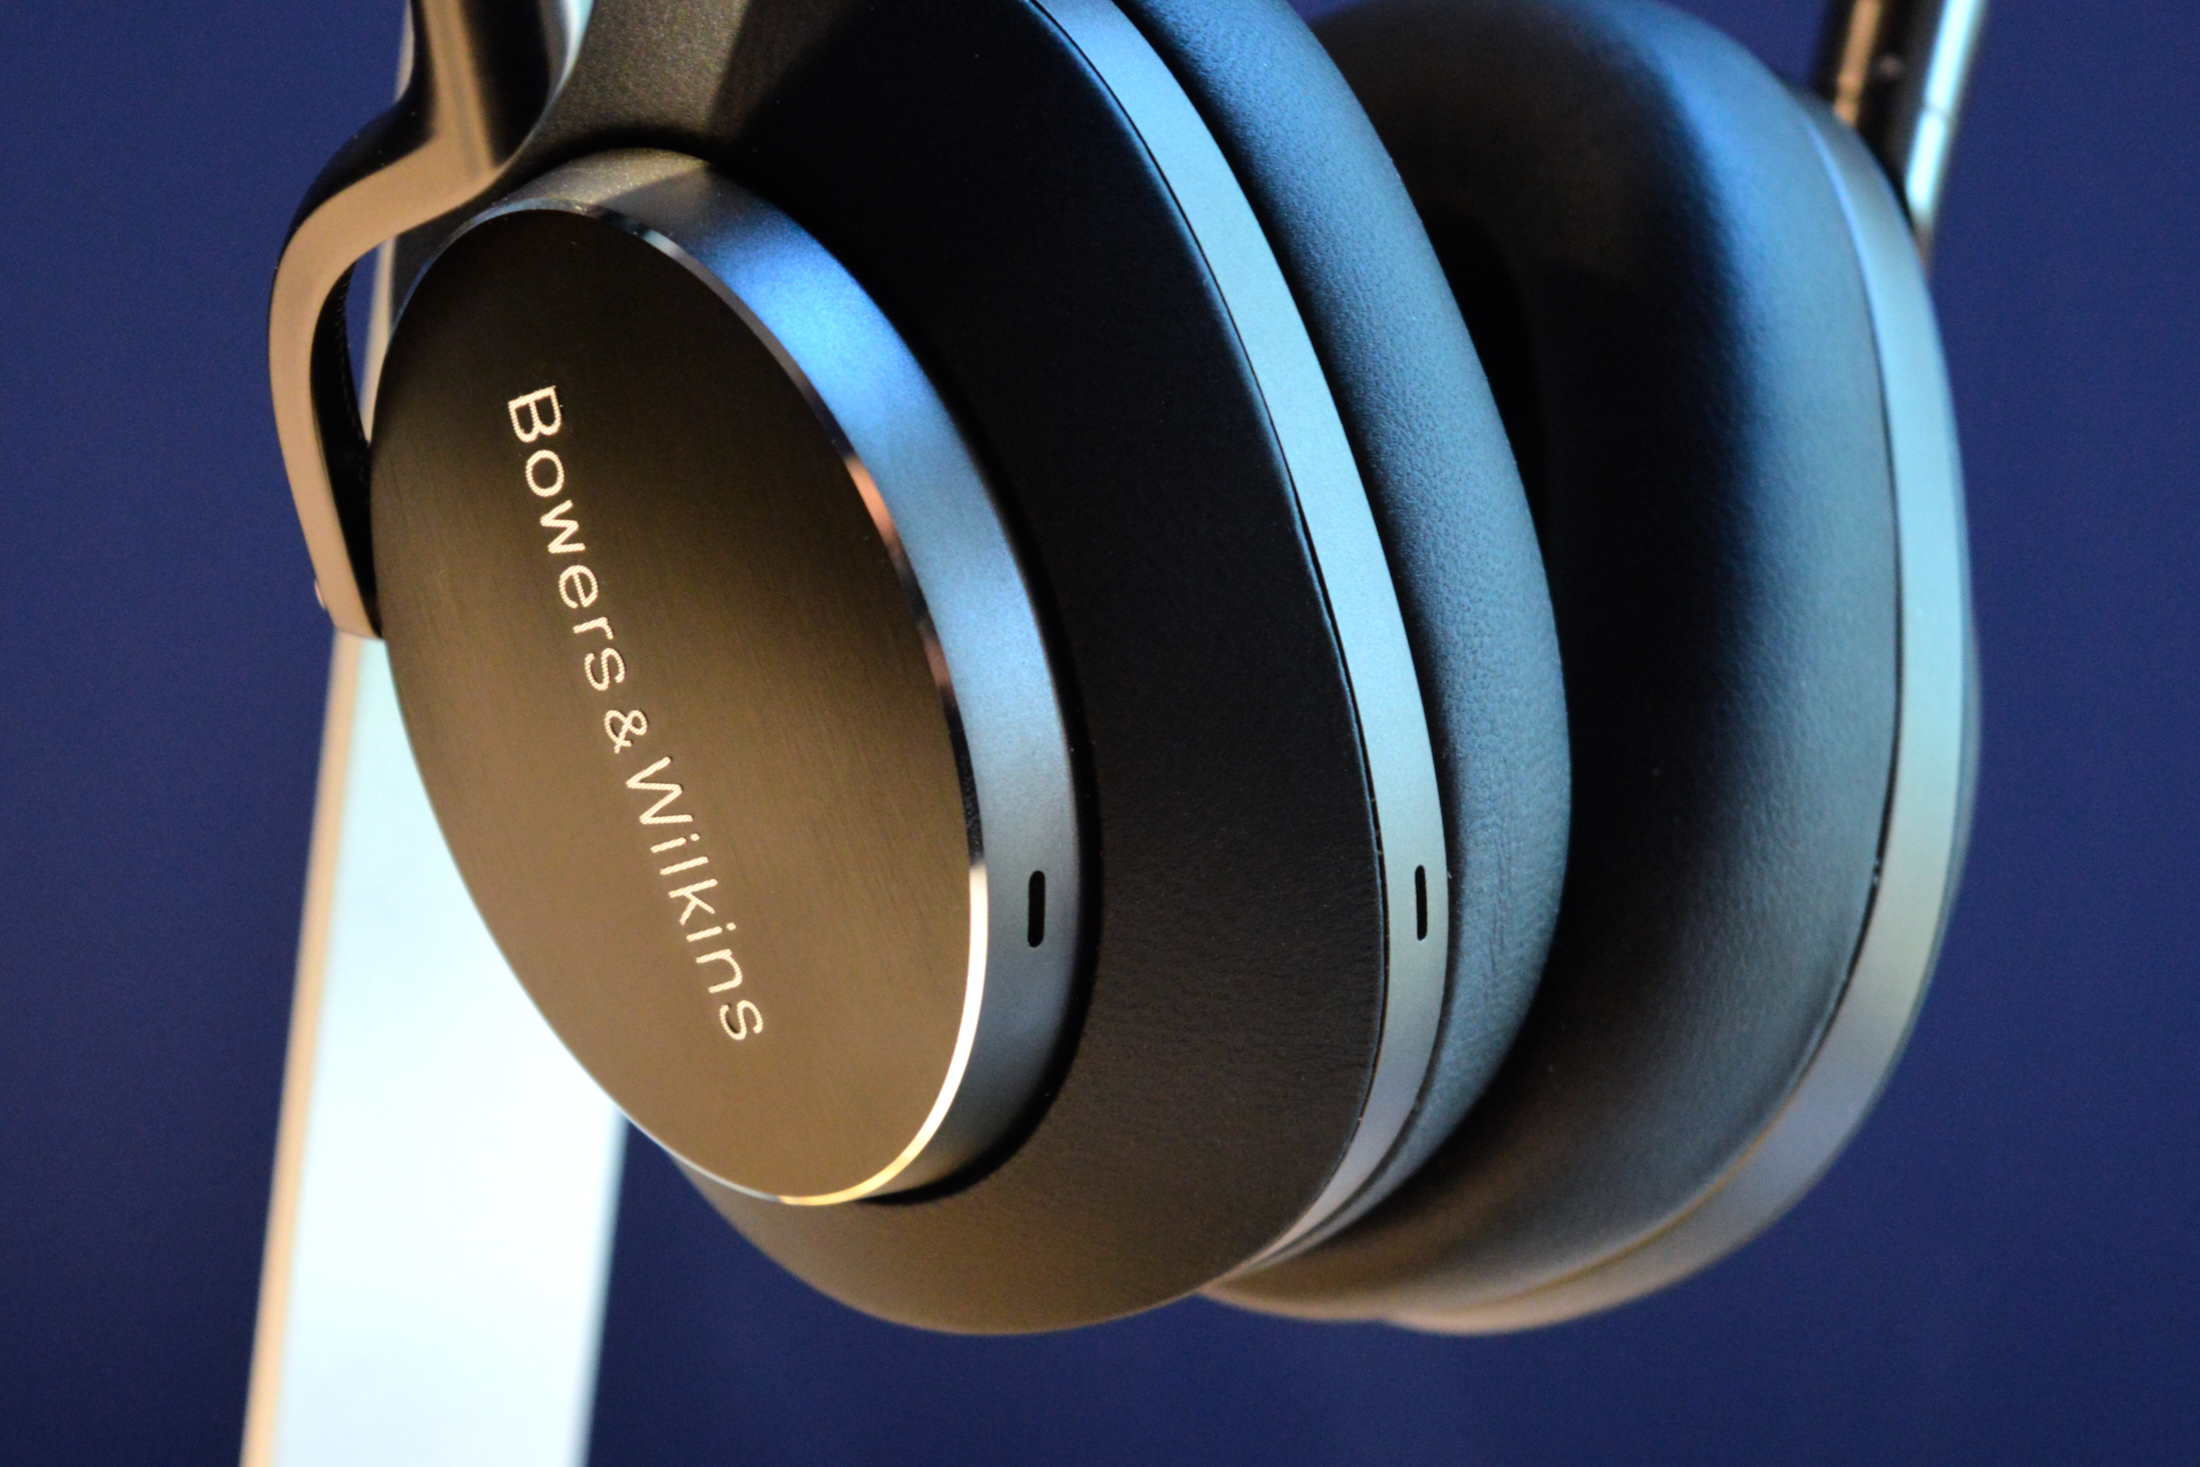 Bowers & Wilkins Px8 review: pure headphone luxury